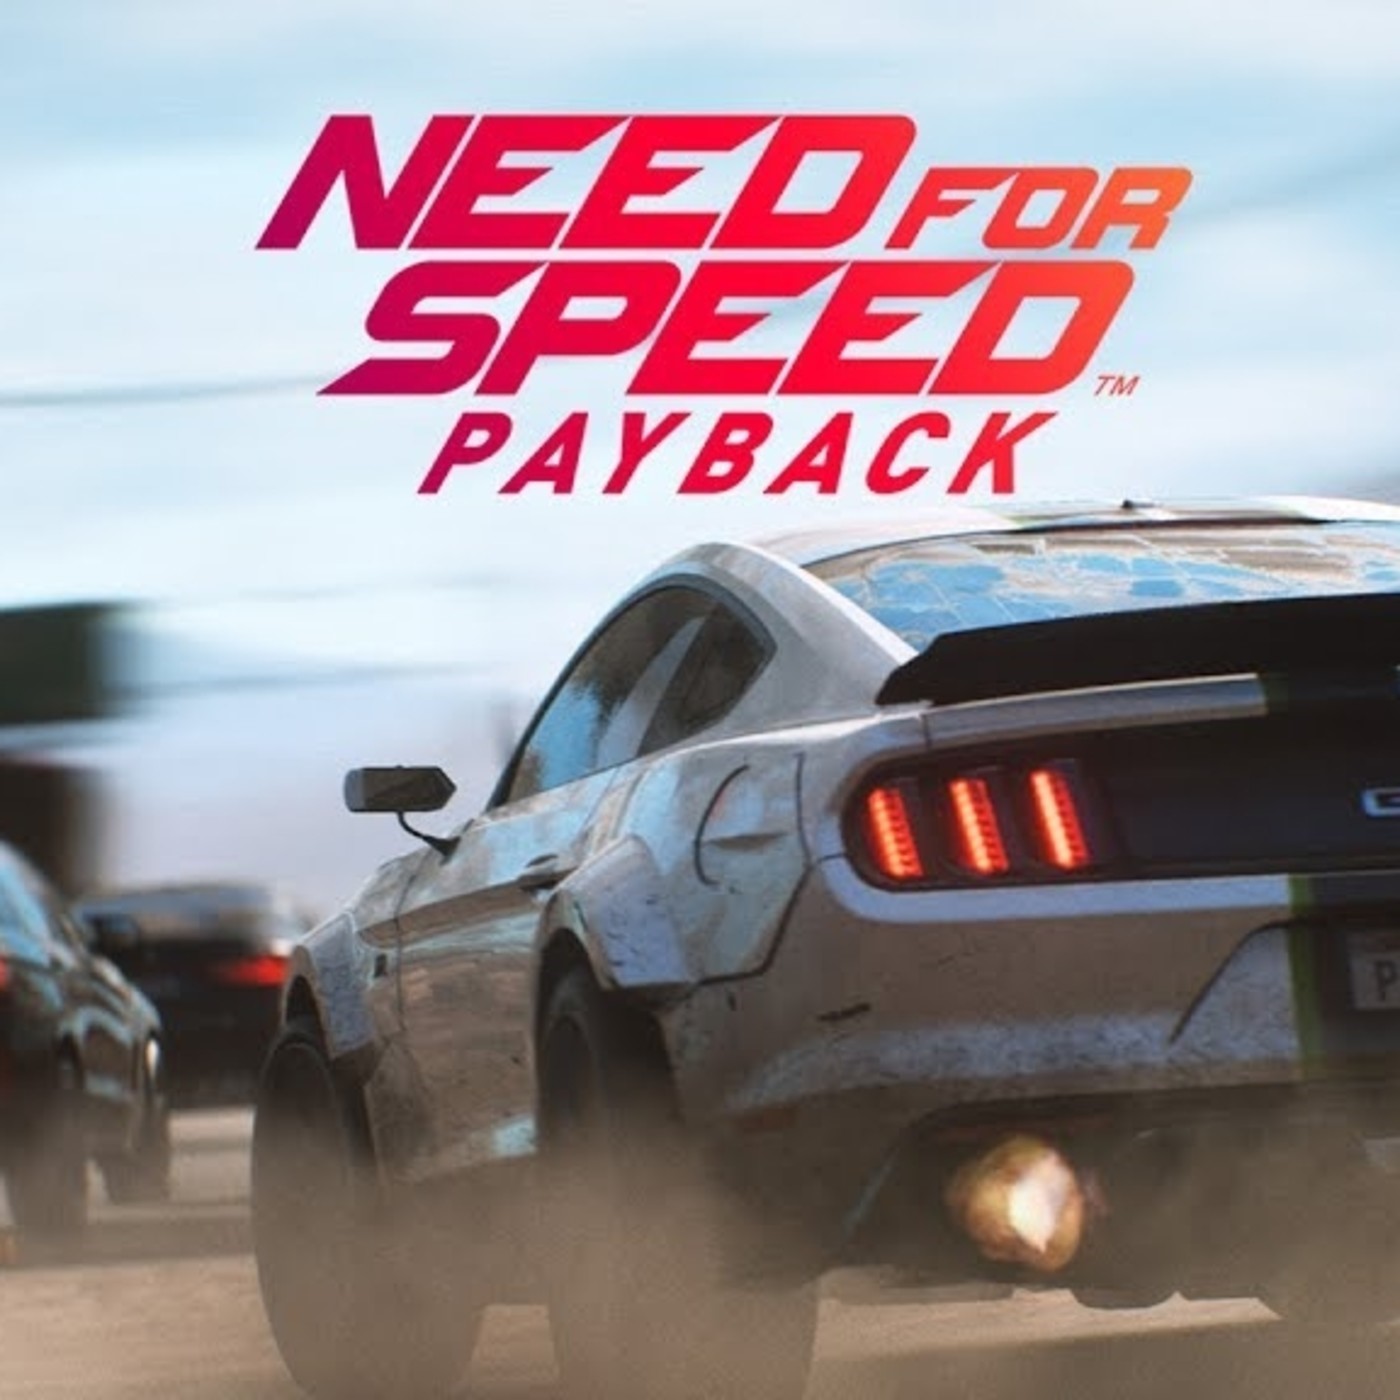 Nfs payback ps4. Need for Speed пейбек. Need for Speed Payback (ps4). Пэйбэк 3. NFS Payback ps5.